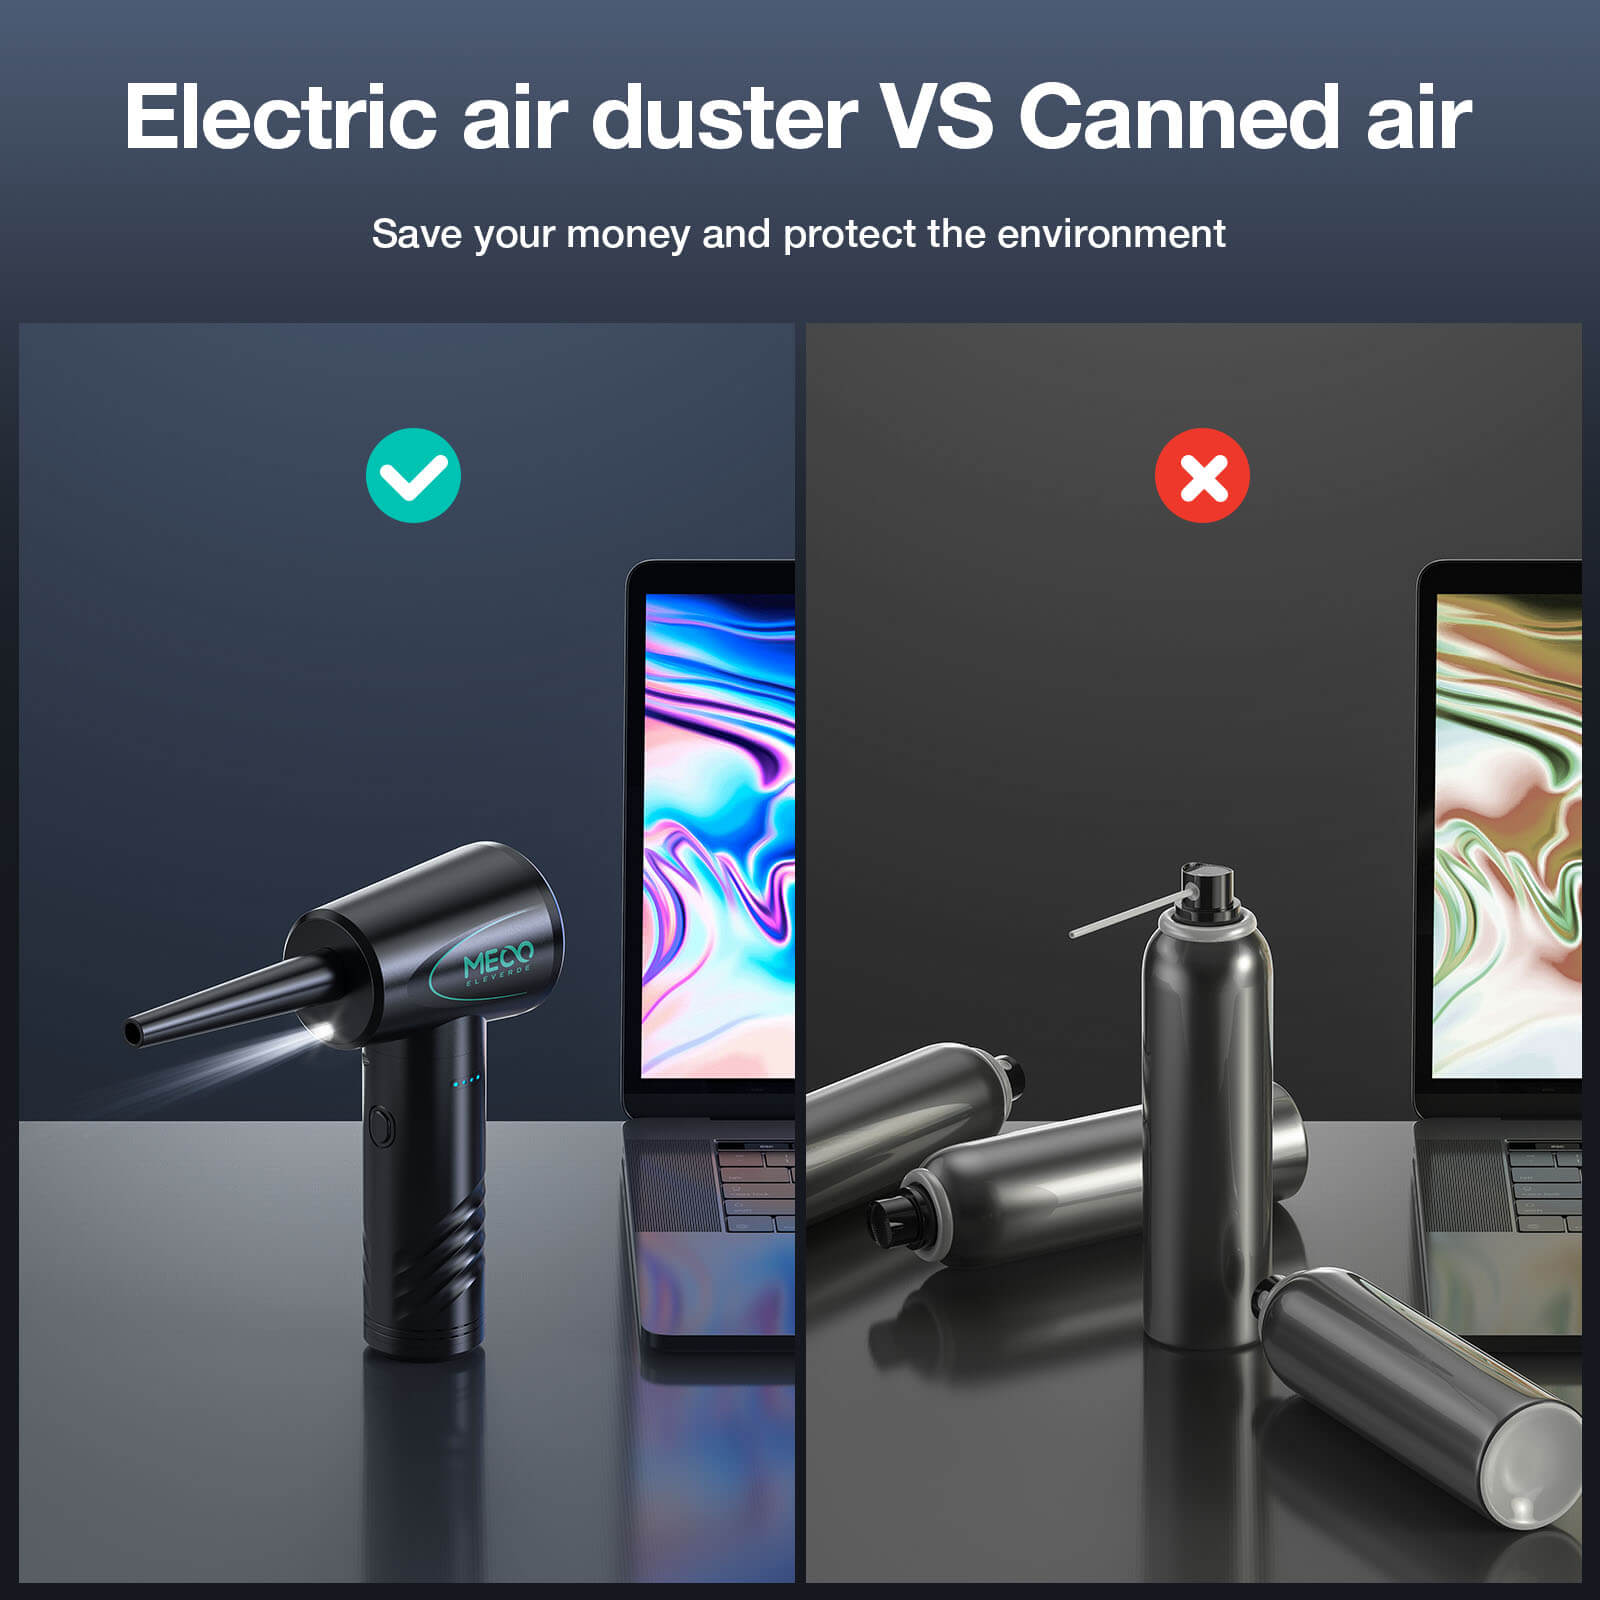 ME-CA1 Compressed Air Duster, Cordless Fast Charge Cleaner